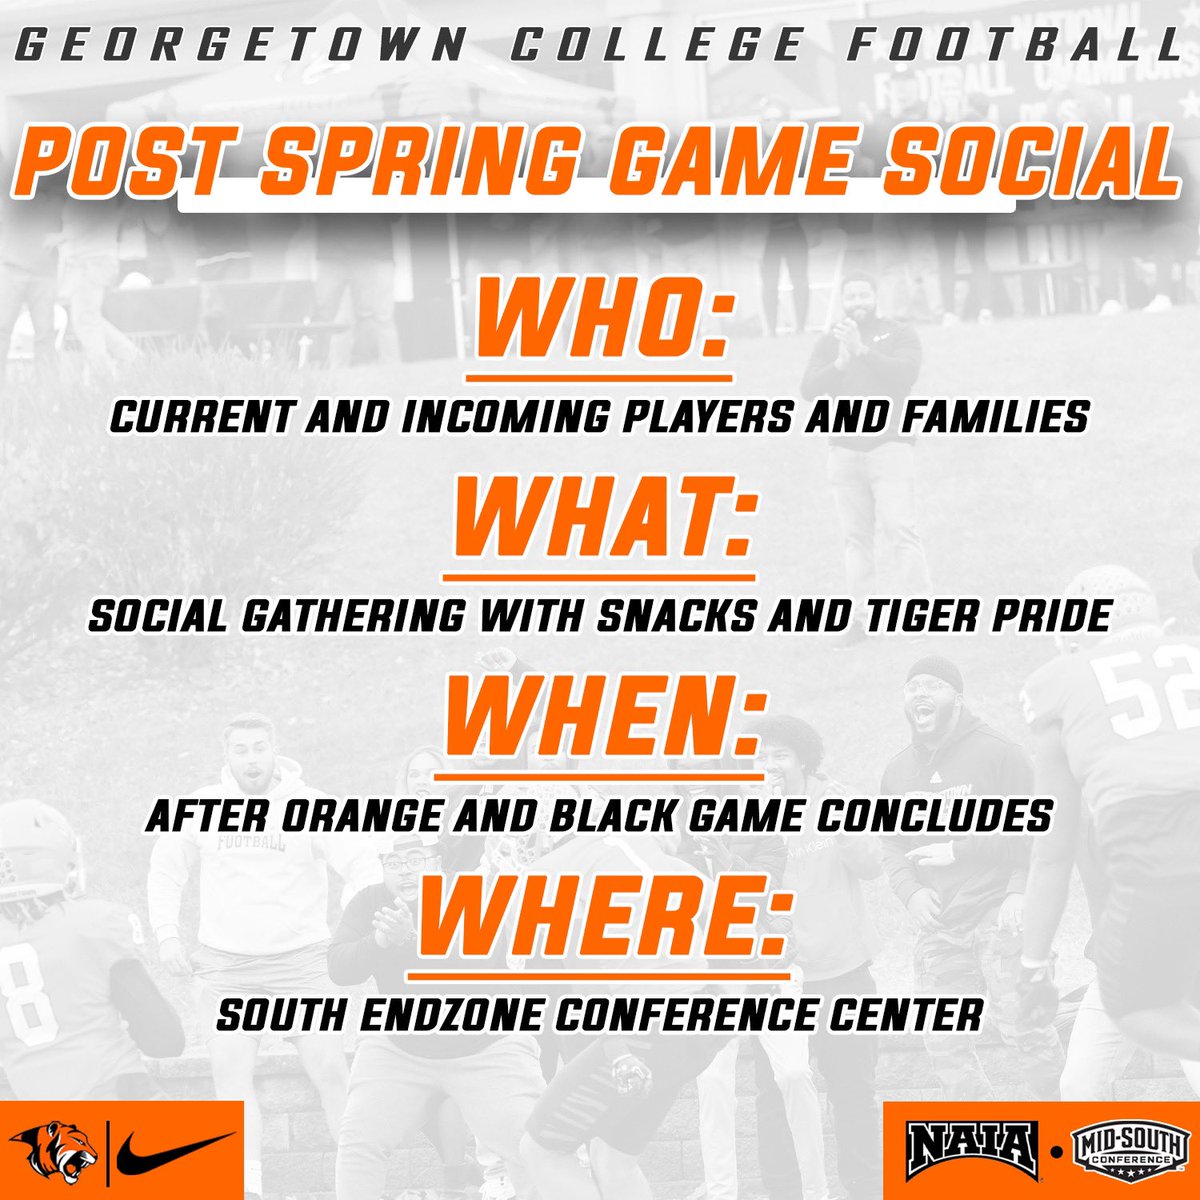 To all current and incoming players and families: We are excited to have you join us in the South Endzone Conference Center for our Post Spring Game Social! There will be coffee, snacks, and a lot of Tiger Pride! See you all there🐅 #TigerPride🐅 | #1and0